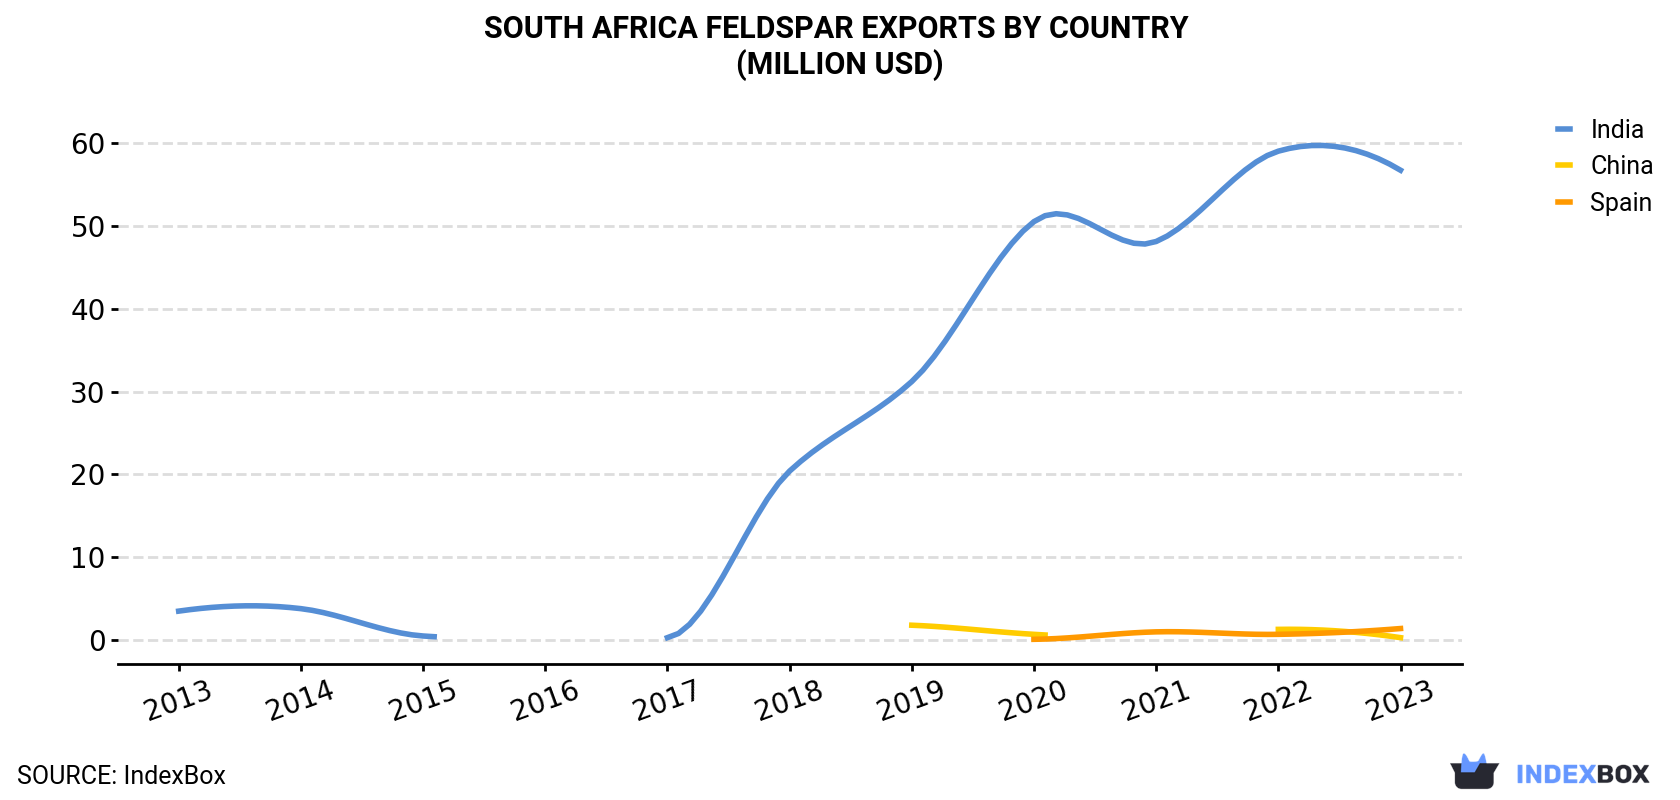 South Africa Feldspar Exports By Country (Million USD)